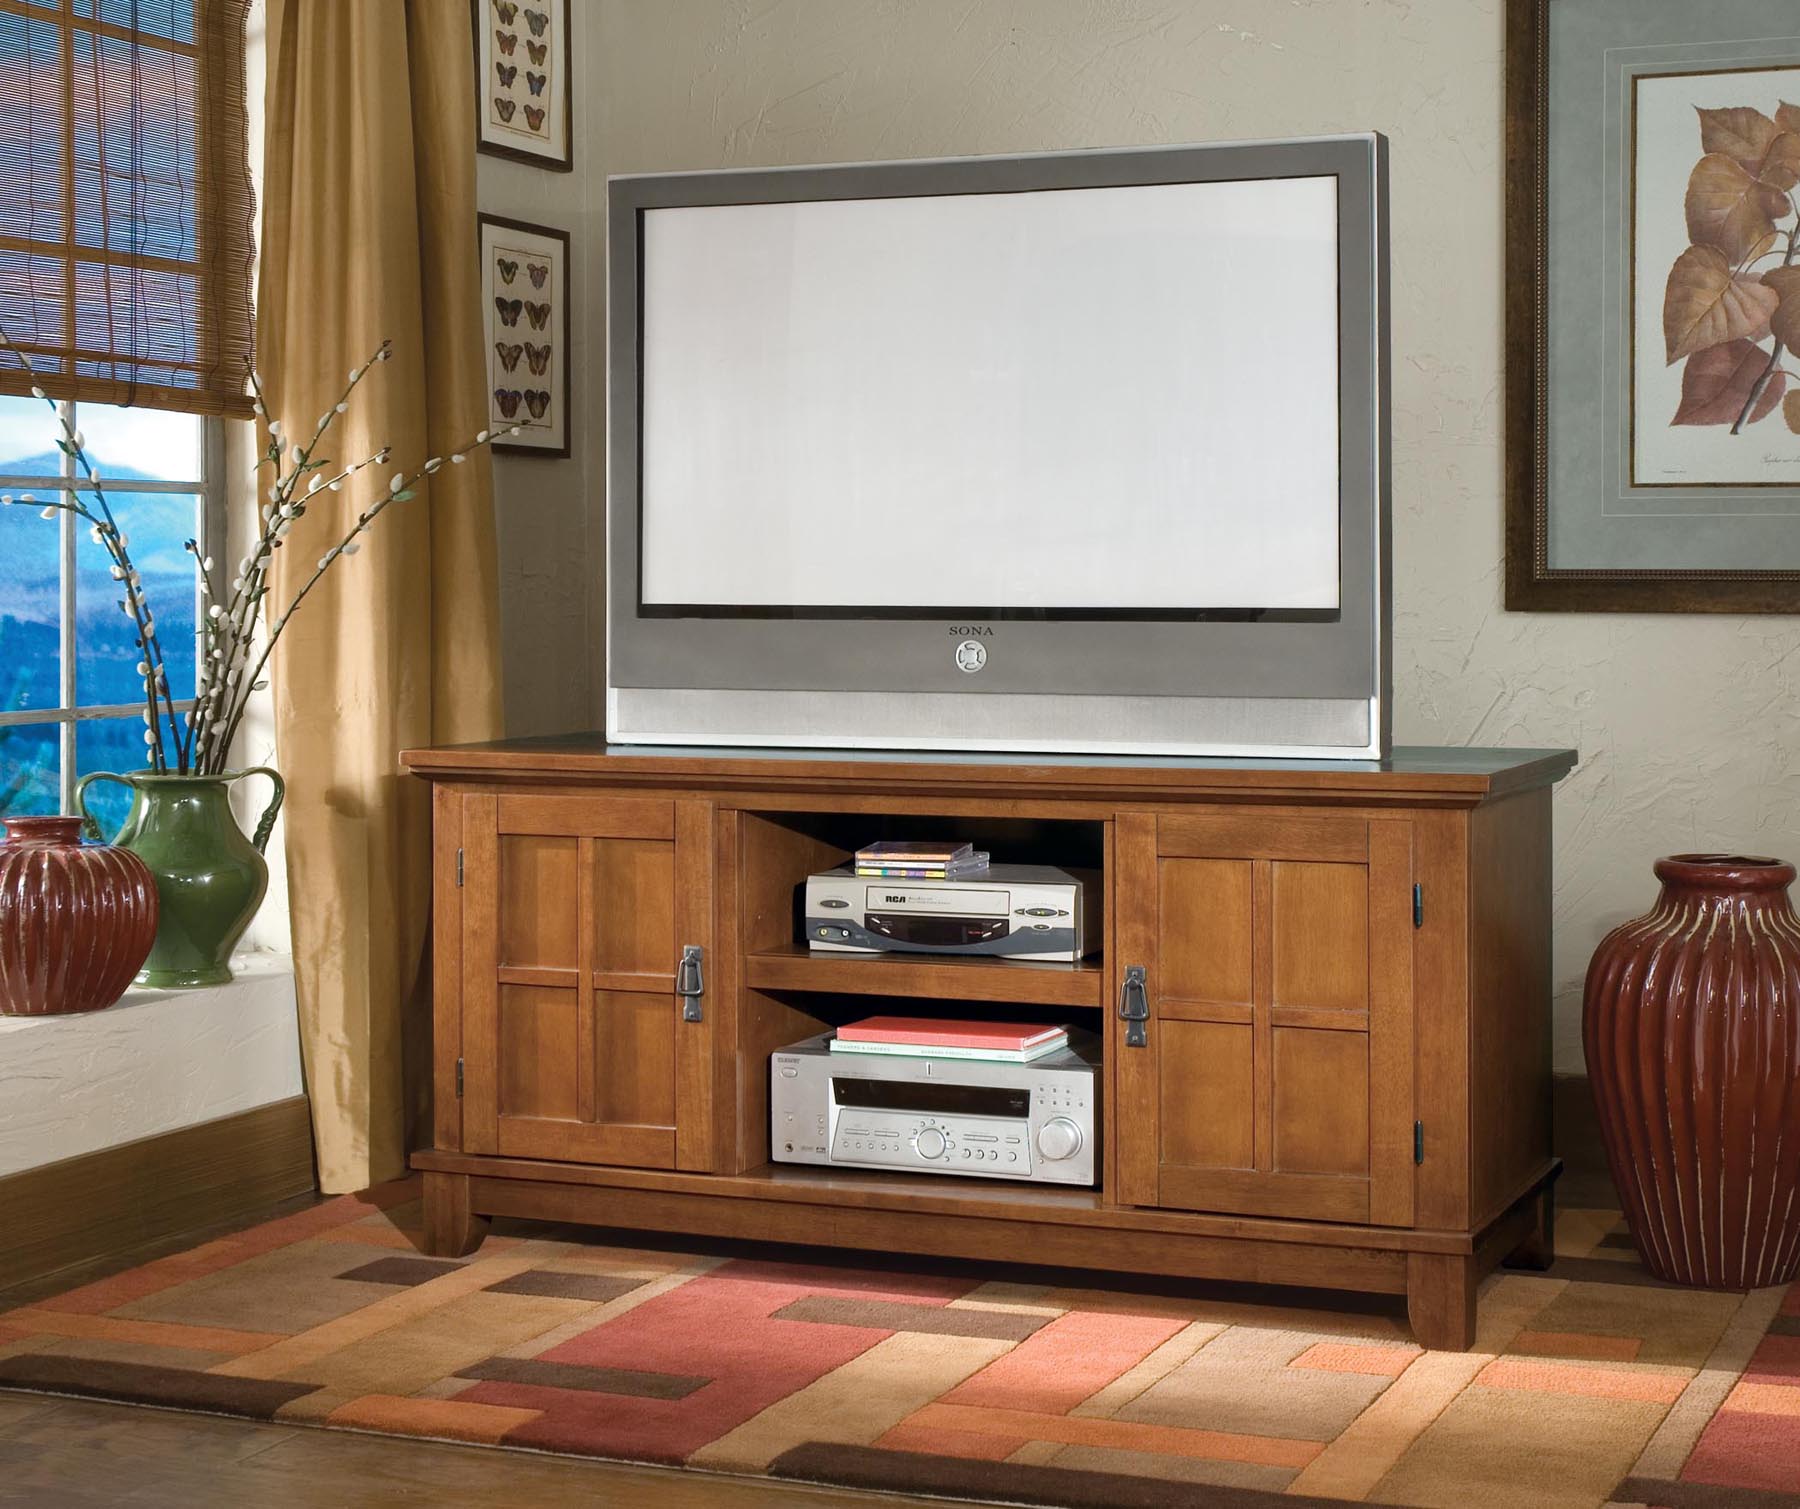 Mission style tv cabinet plans Plans DIY How to Make 